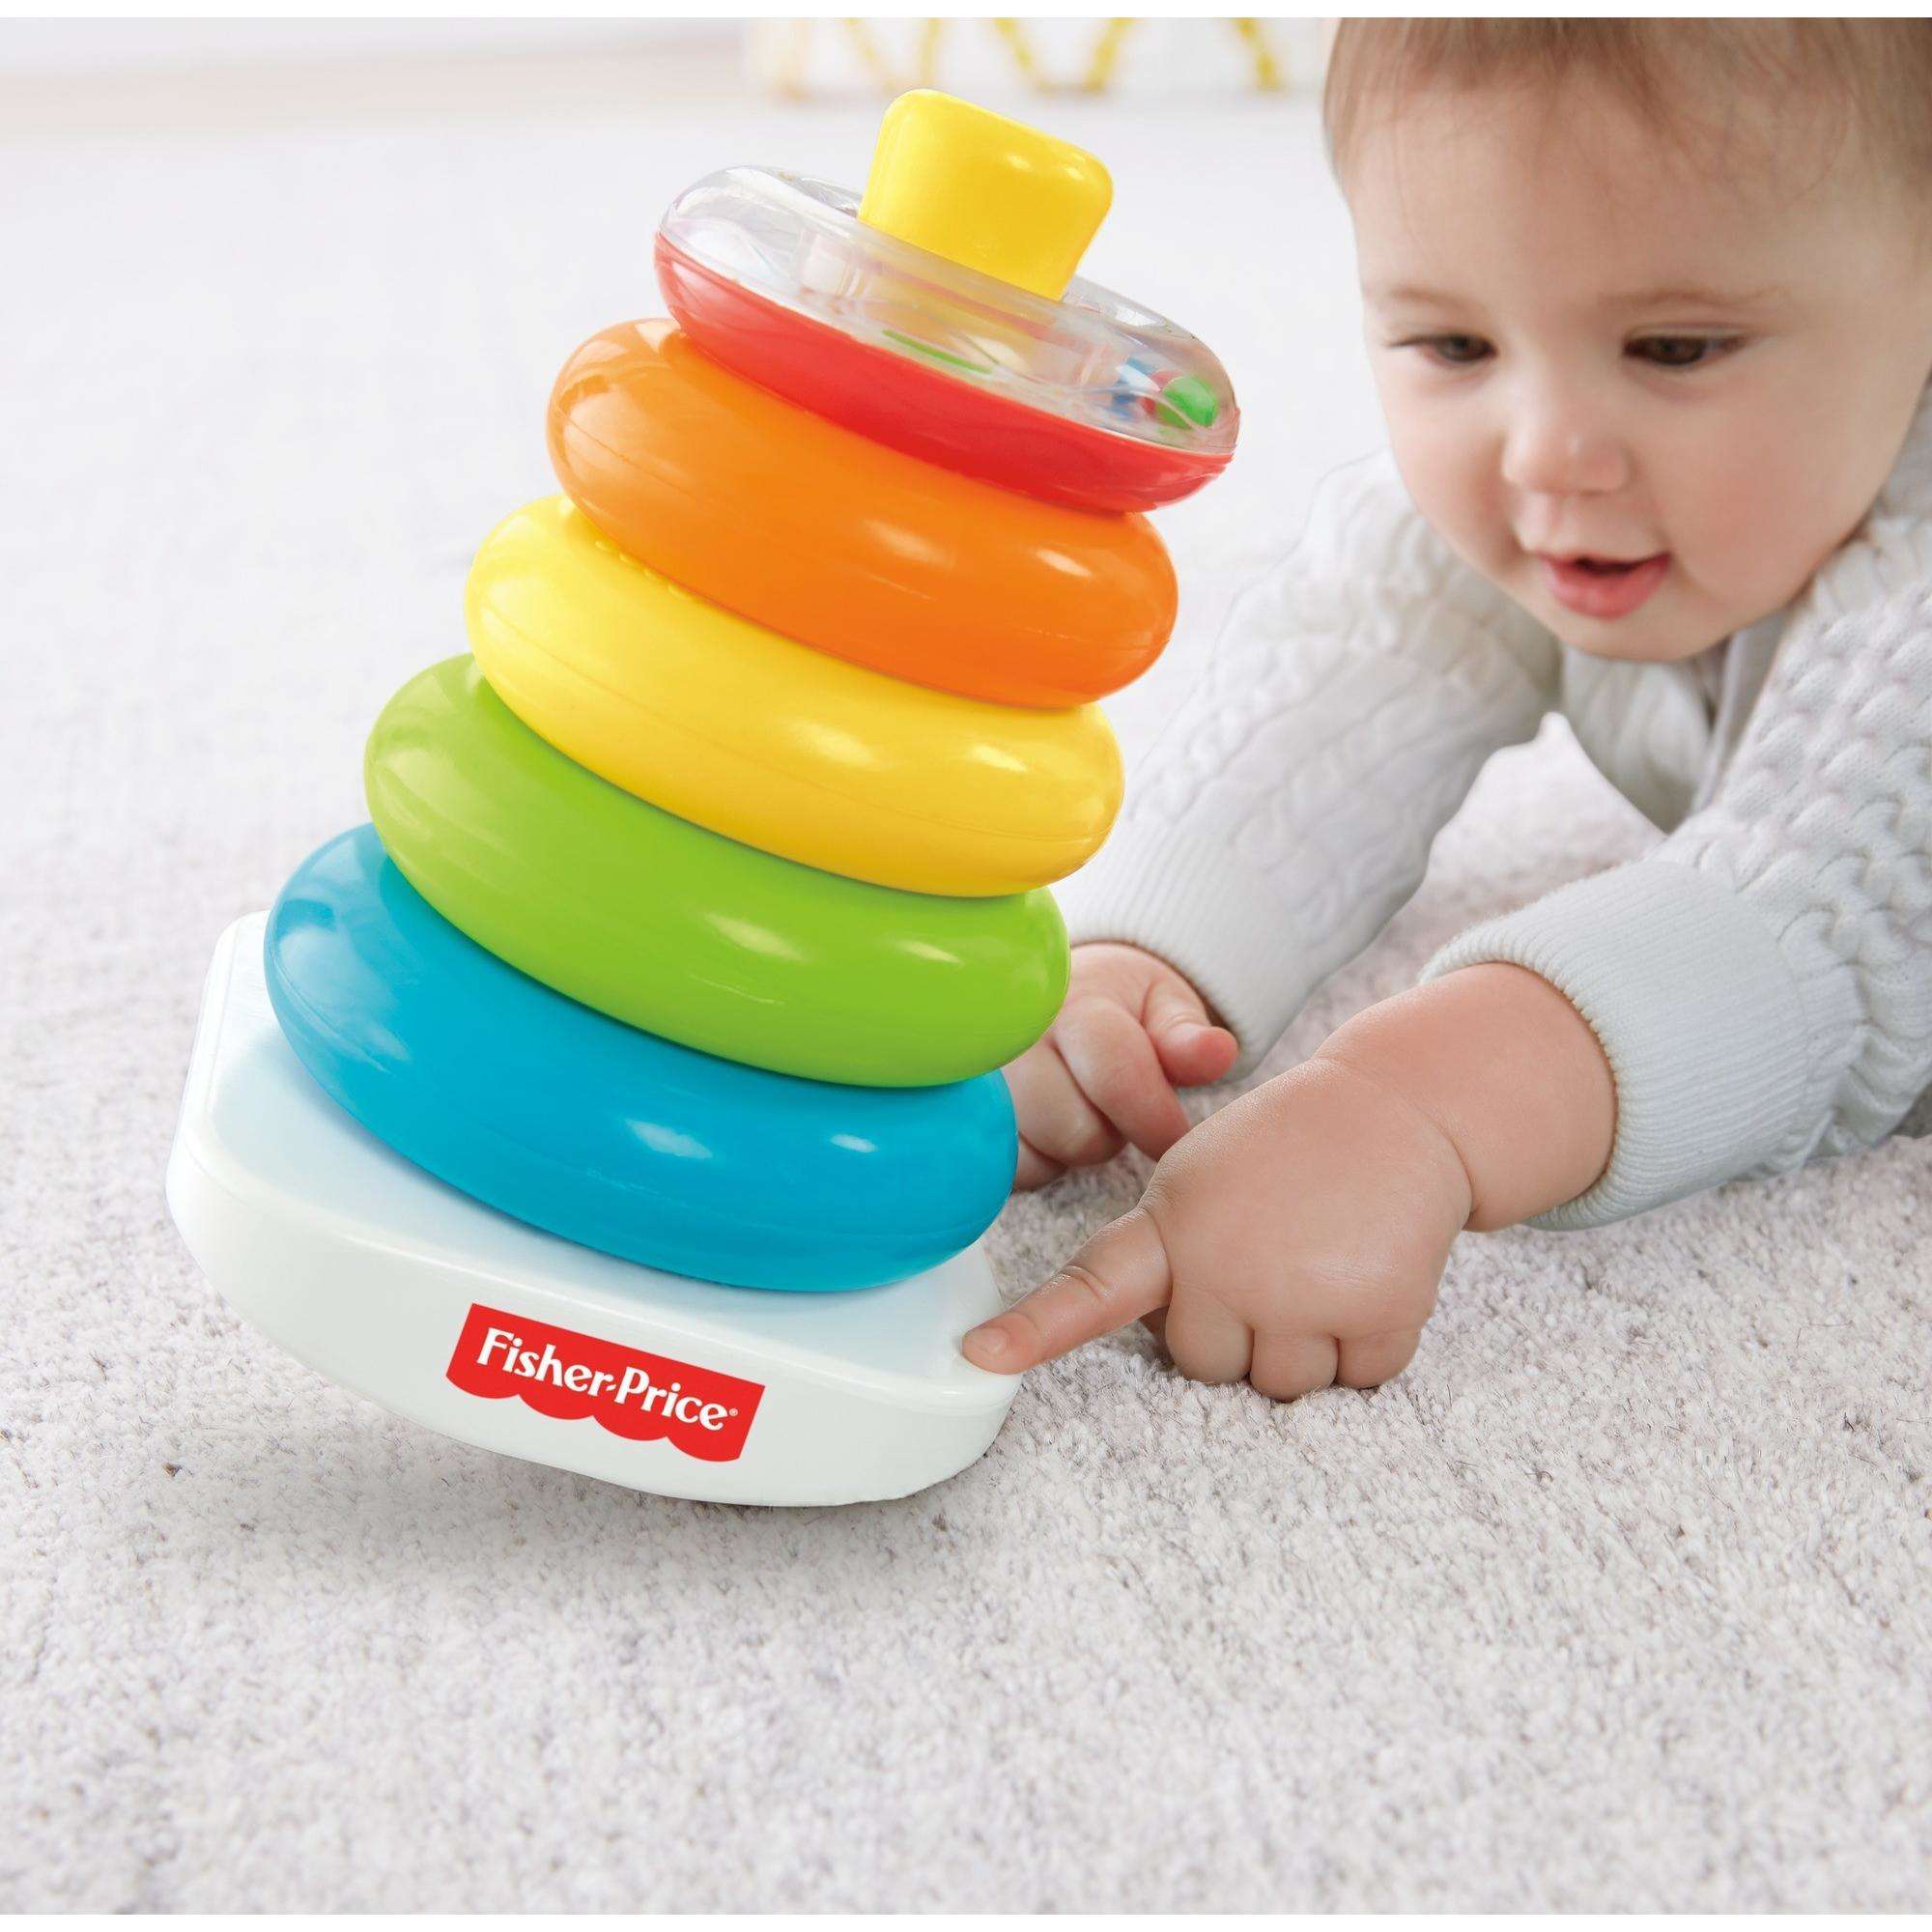 Fisher-Price Rock-A-Stack Wedge Package Toy - image 2 of 16